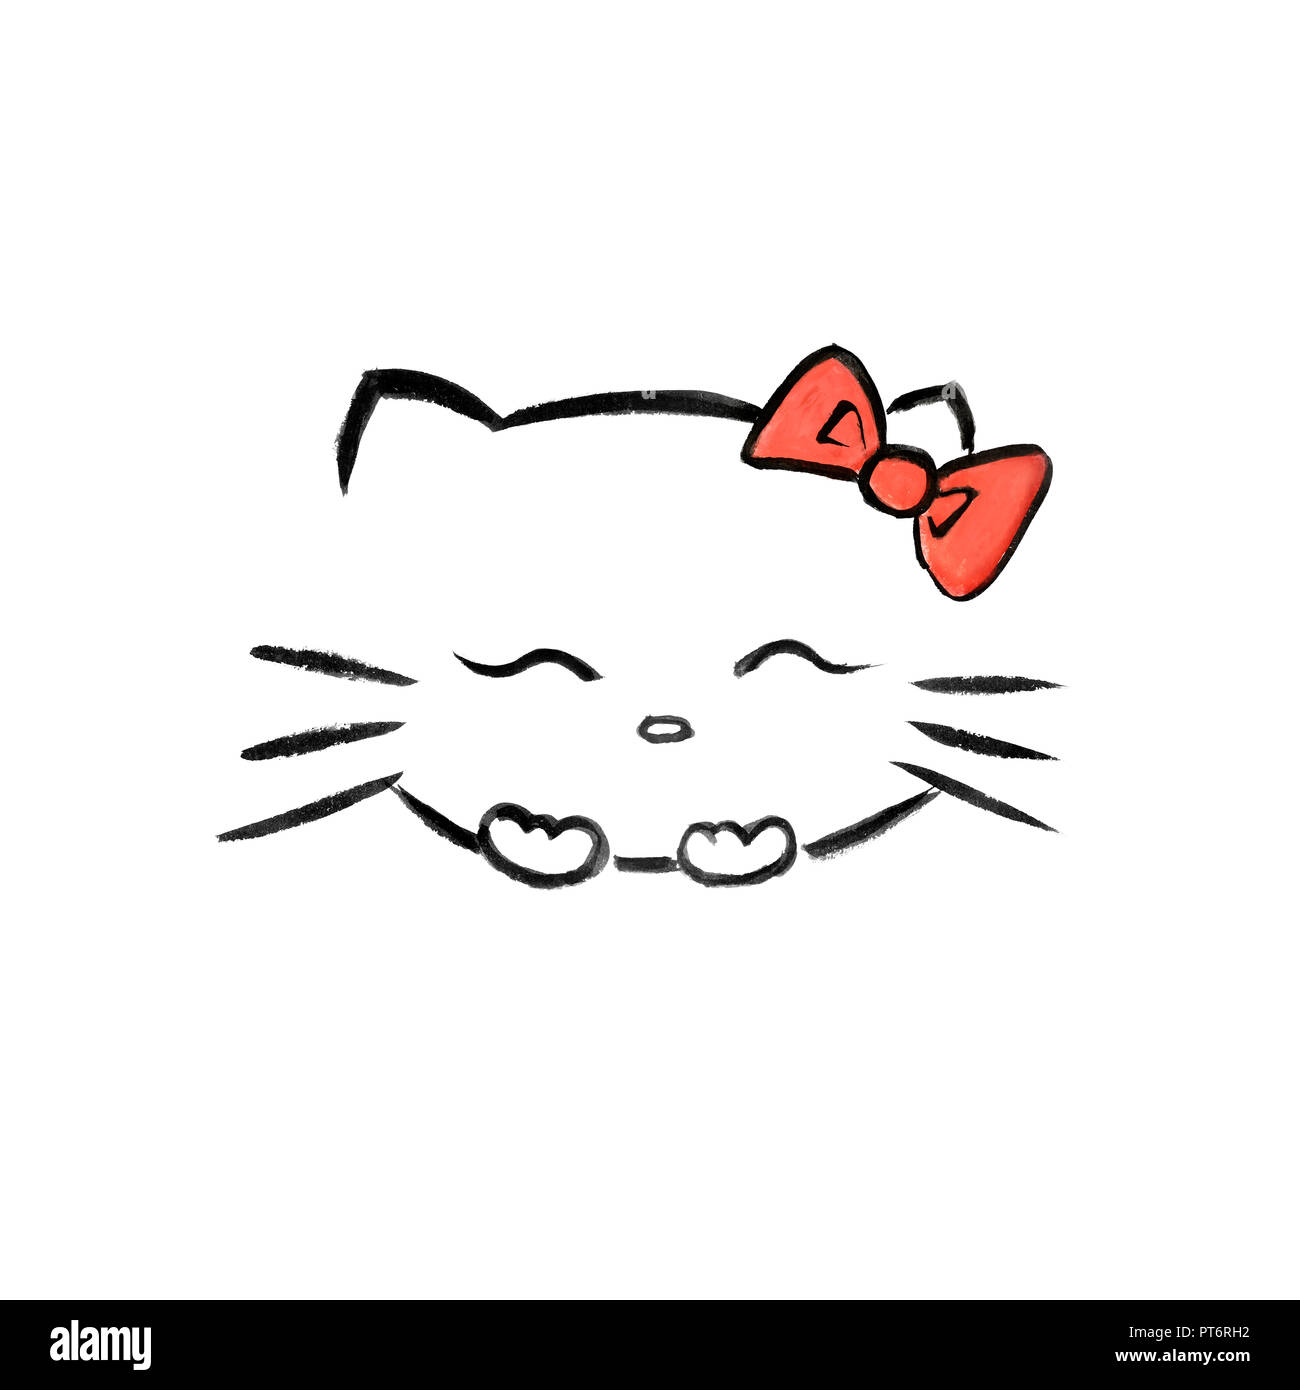 Happily Giggling Hello Kitty With A Red Bow Japanese Kawaii Cartoon Character Inspired Sumi E Illustration Isolated On White Background Stock Photo Alamy